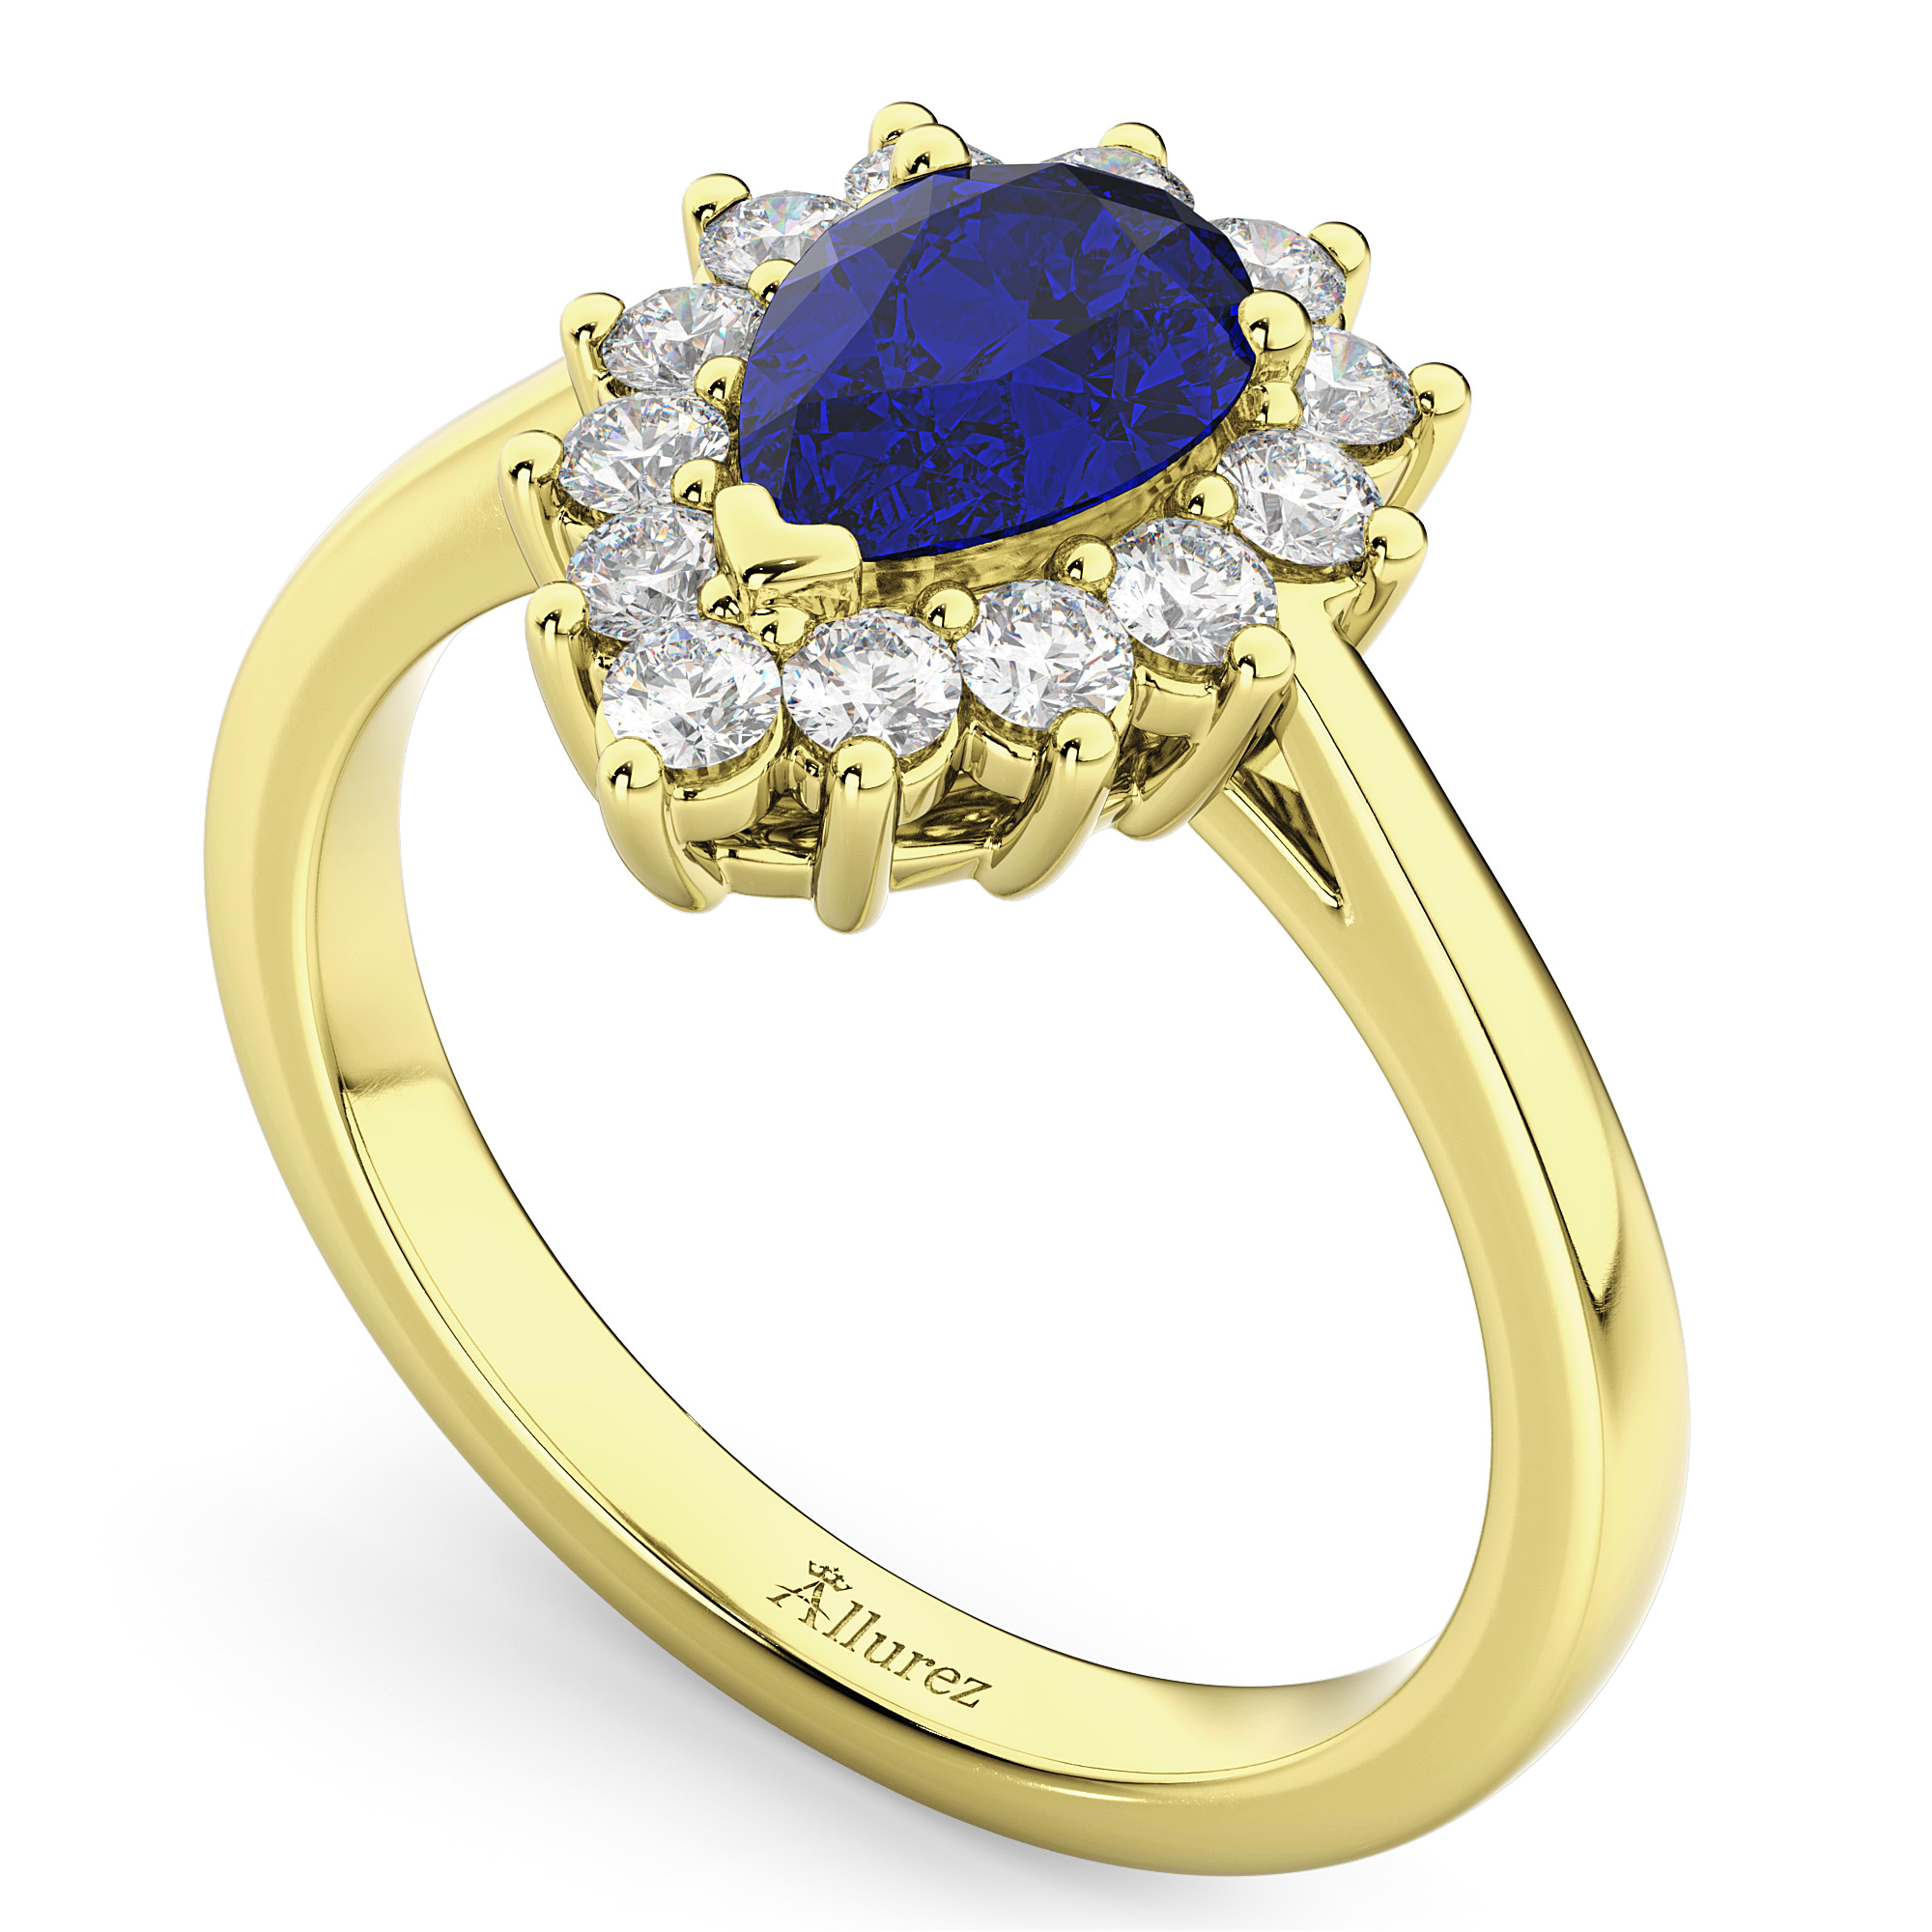 Halo Blue Sapphire & Diamond Floral Pear Shaped Fashion Ring 14k Yellow Gold (1.27ct)